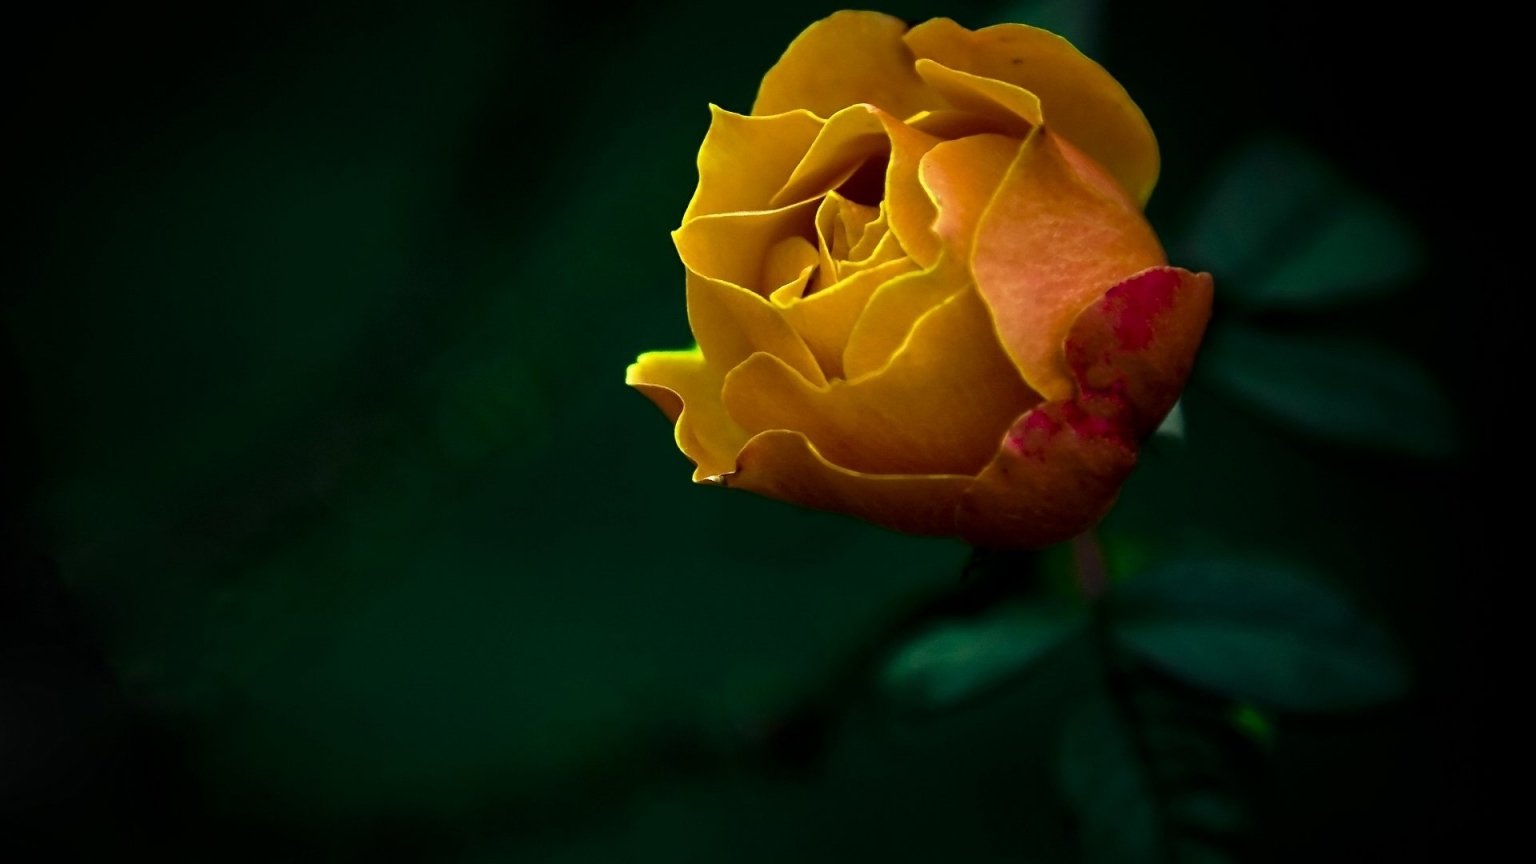 The last Rose for 1536 x 864 HDTV resolution